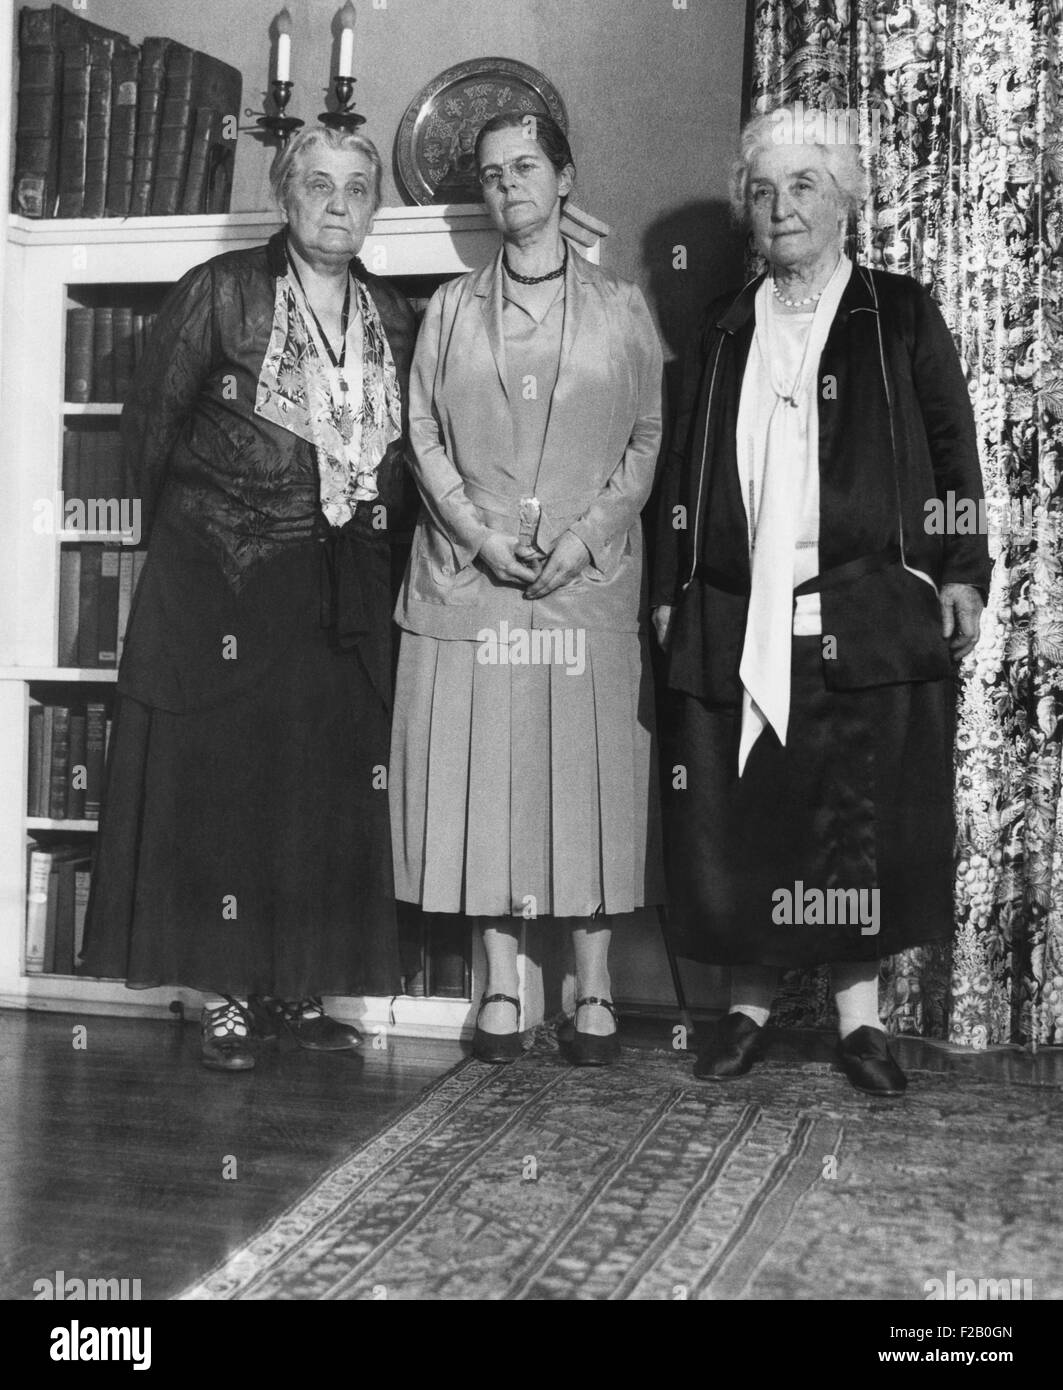 Jane Addams (left) received the Mary Carrie Thomas Award of Bryn Mawr College. May 3, 1931. She was recognized for her social worker, and leadership for women's suffrage and world peace. In center is Marian Edwards Park, president of Bryn Mawr College. At right is President Emeritus Mary Carey Thomas of Bryn Mawr College, in whose honor the prize was founded. (CSU 2015 9 1128) Stock Photo